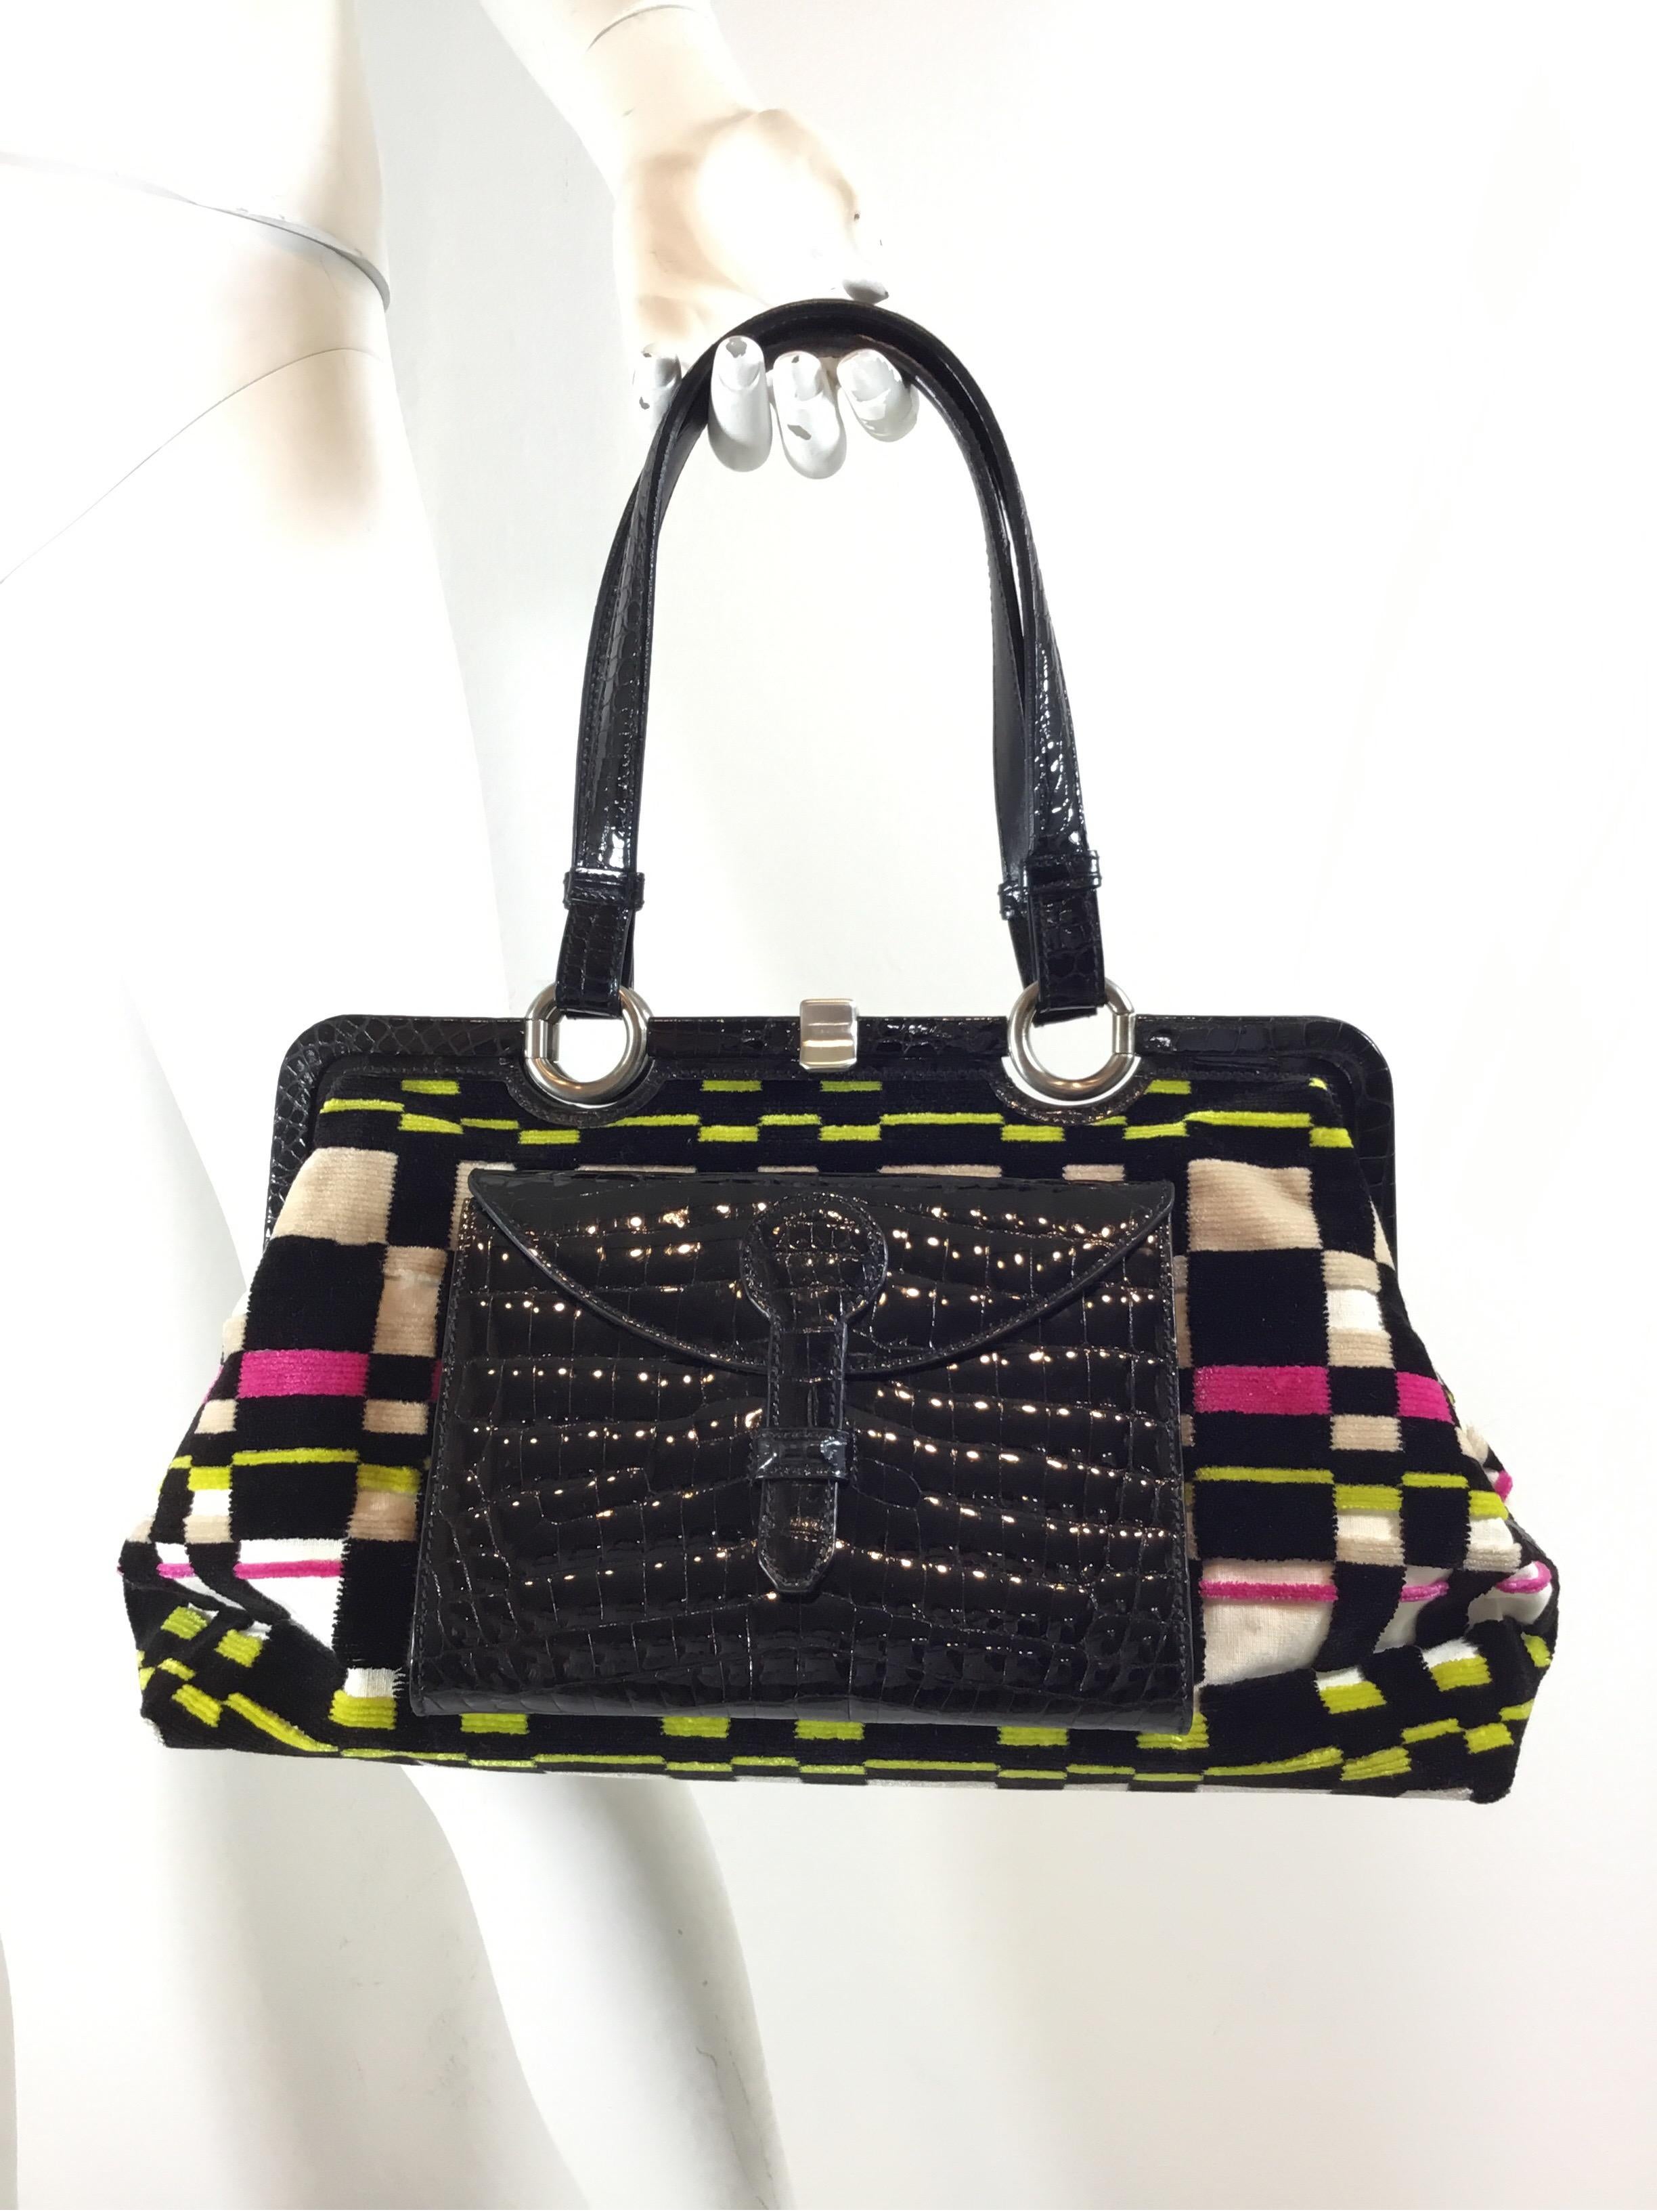 Bottega Veneta handbag features a Multicolor terry clotch/velvet fabric with black patent crocodile trimming and front pocket. Handbag has a frame opening and two flat top handles attached by silvertone hardware. Full leather lining. Made in Italy.